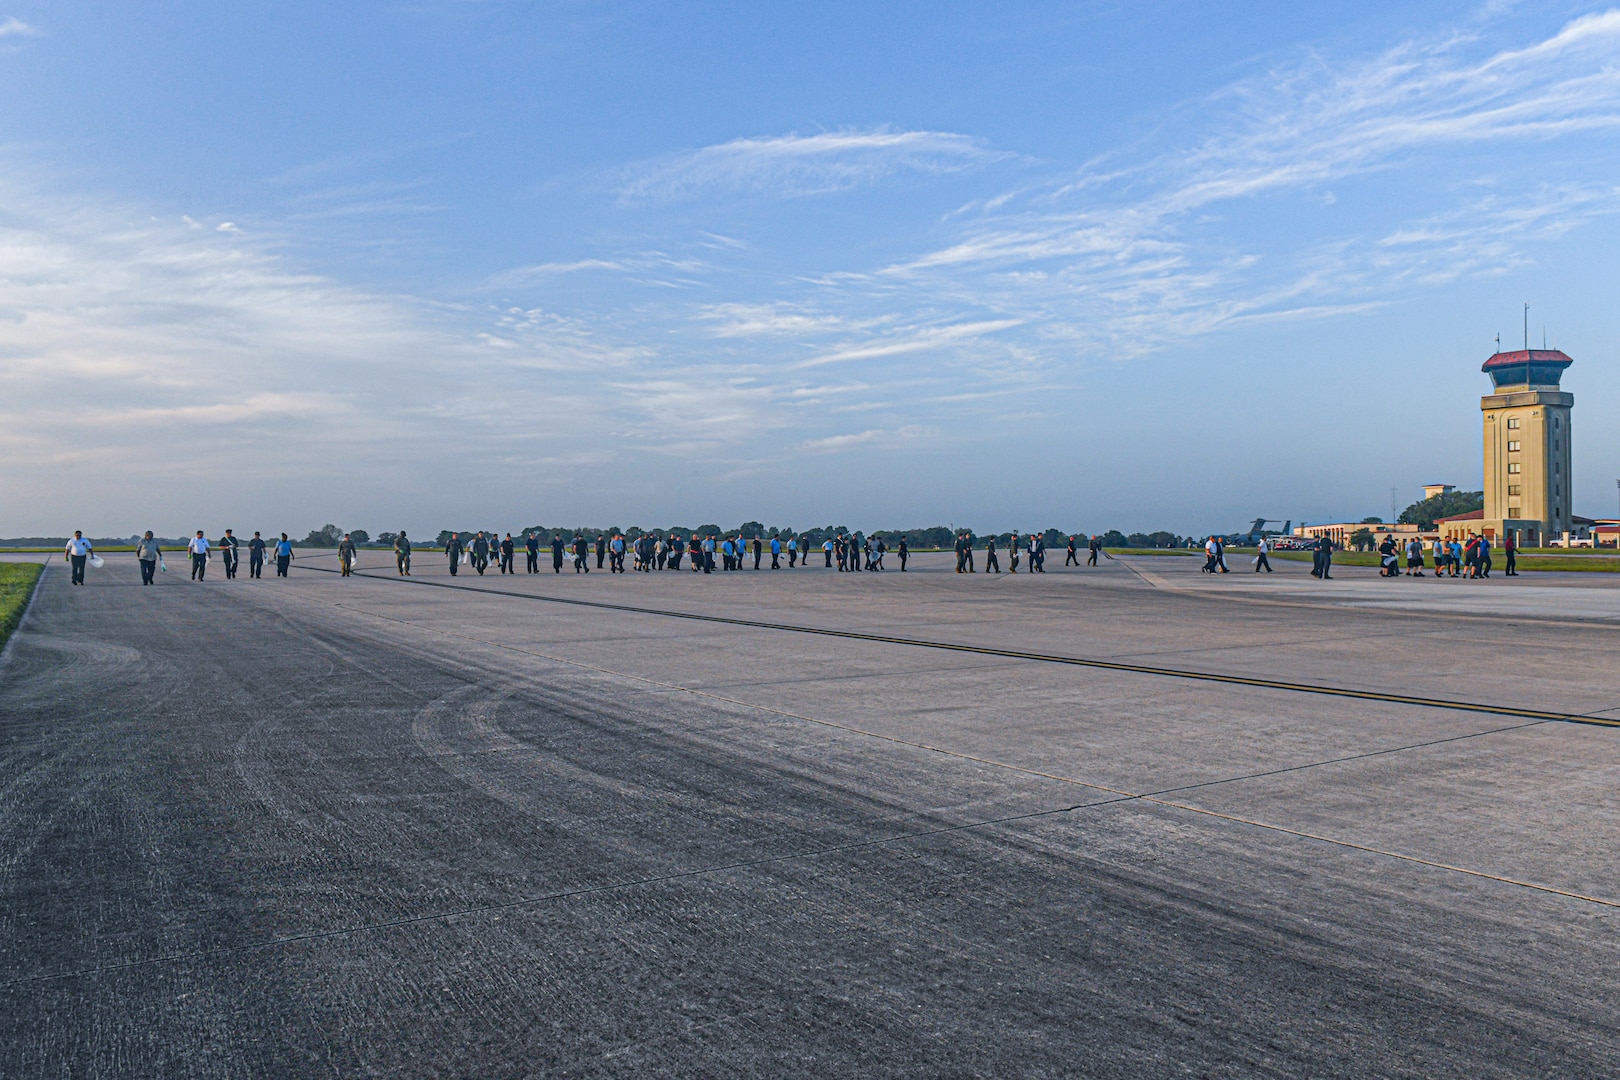 Dozens of members line up across the runway to continue a FOD walk.